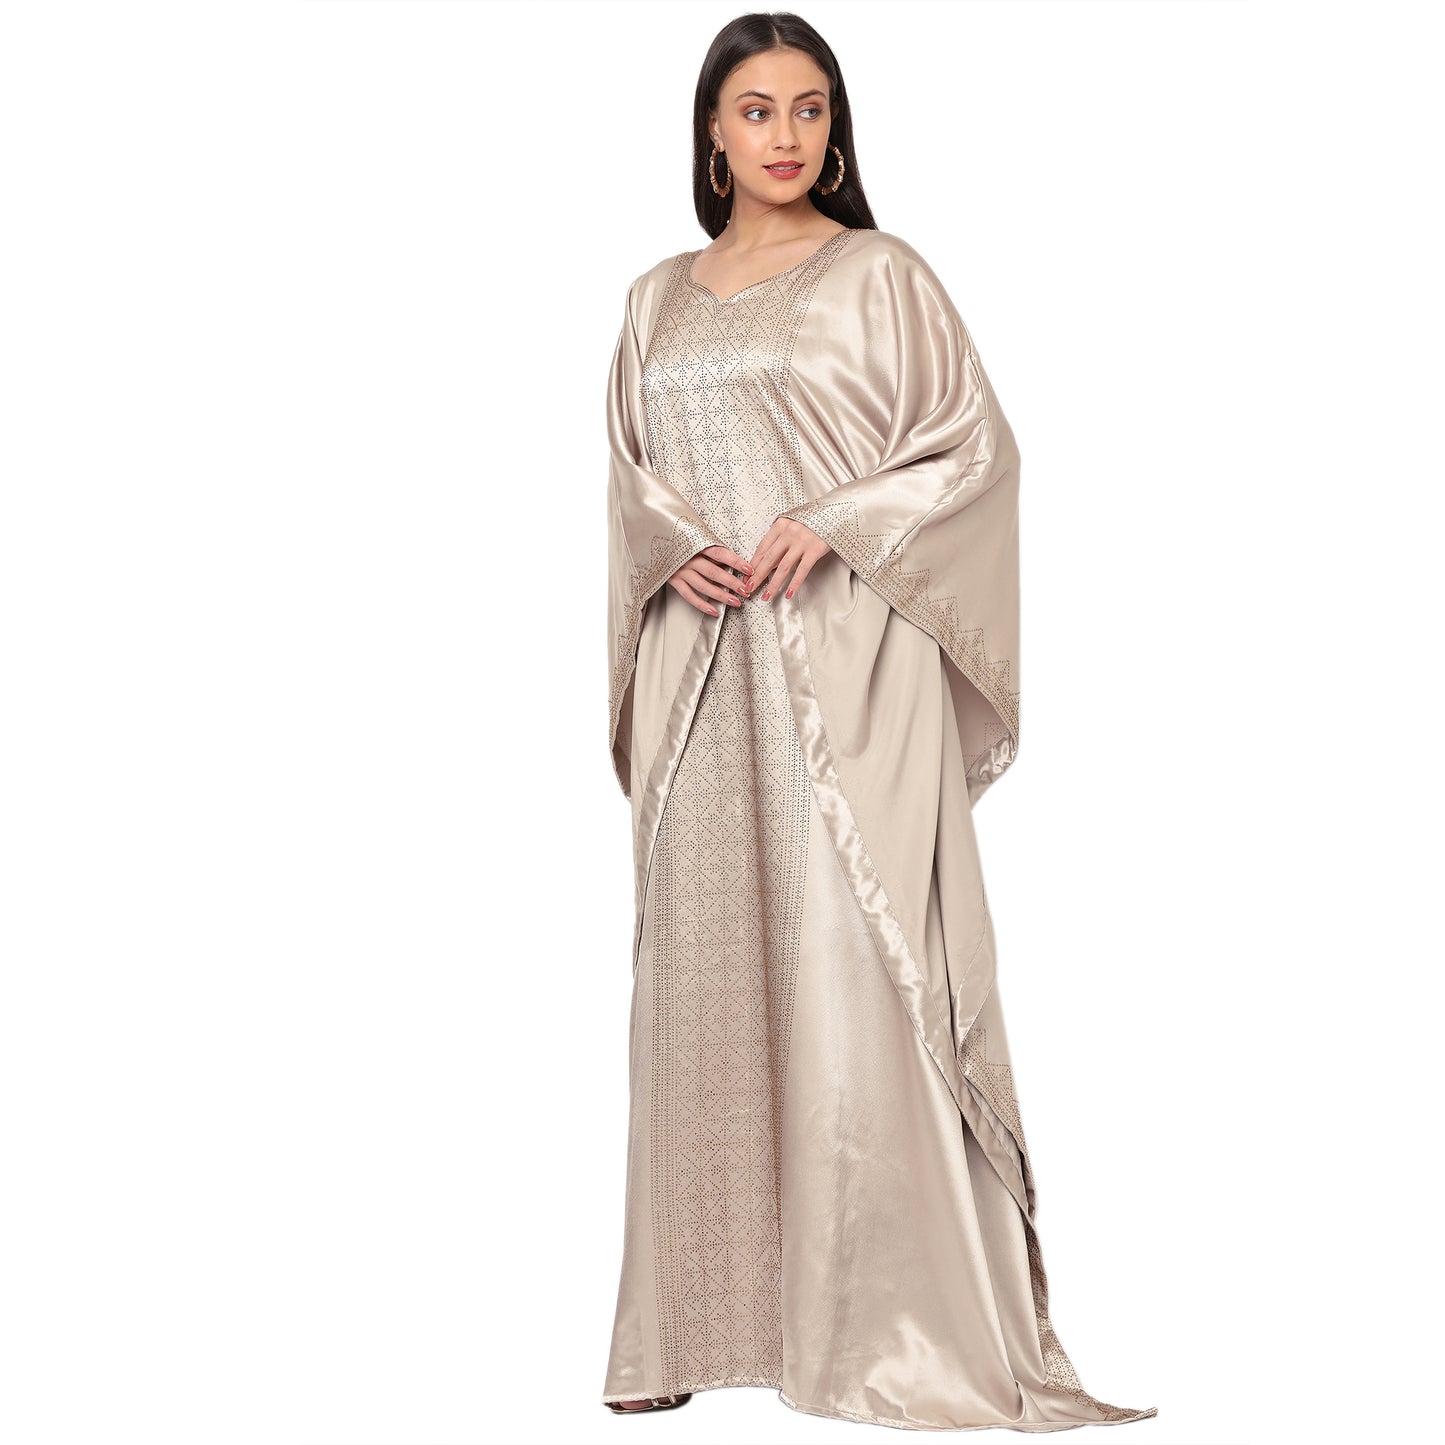 Load image into Gallery viewer, Arabian Beige Color Satin Dress - Maxim Creation
